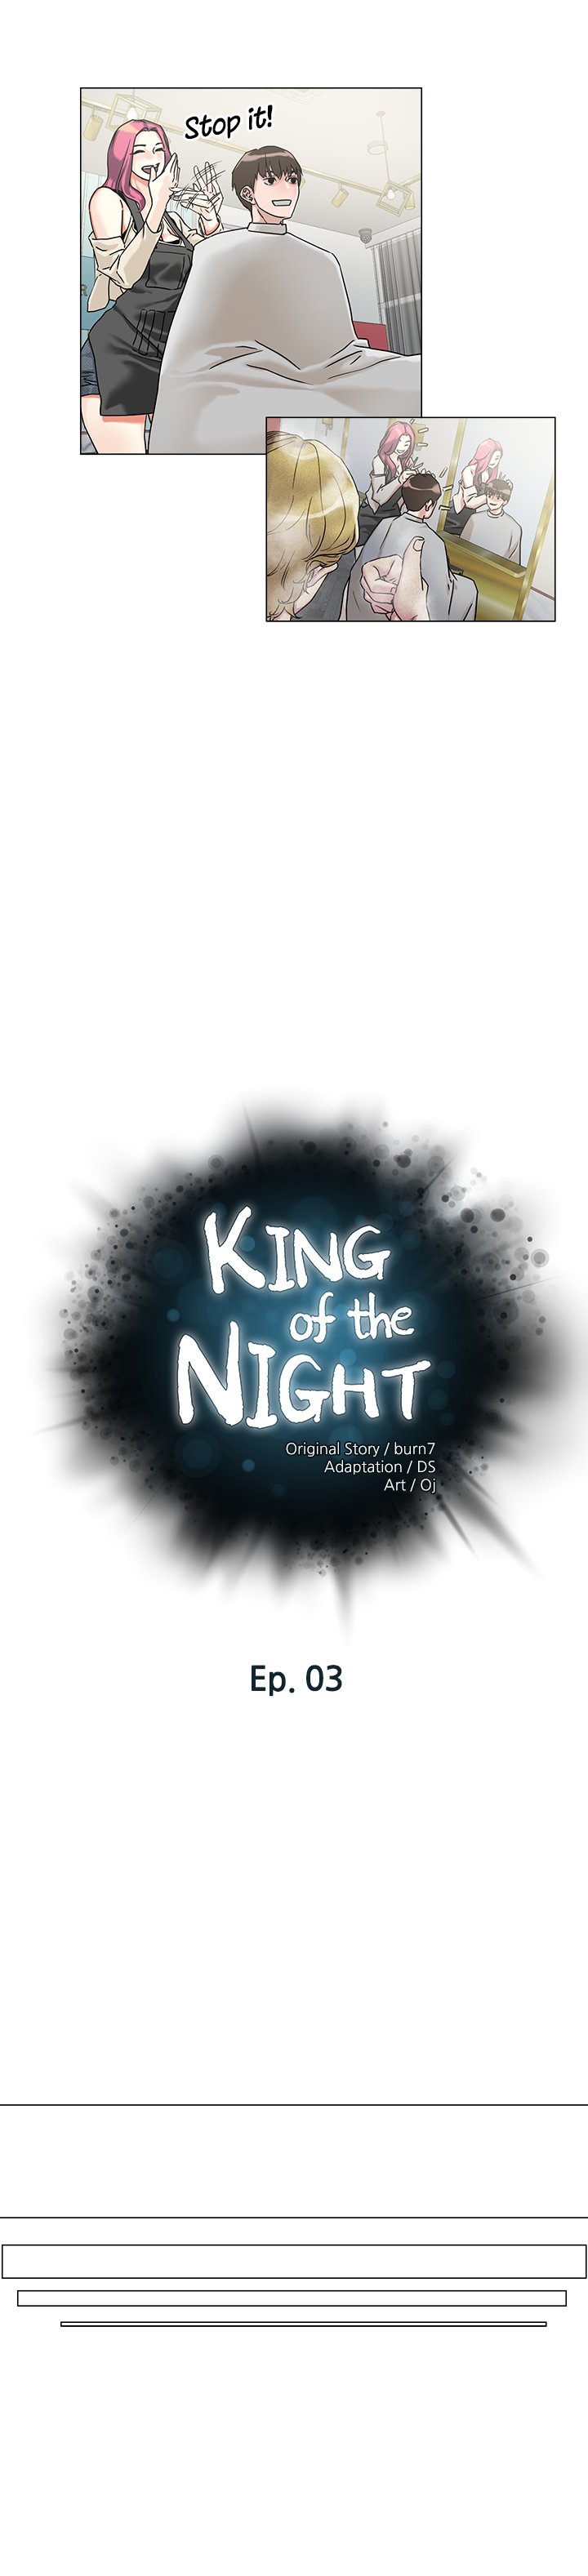 King Of The Night image